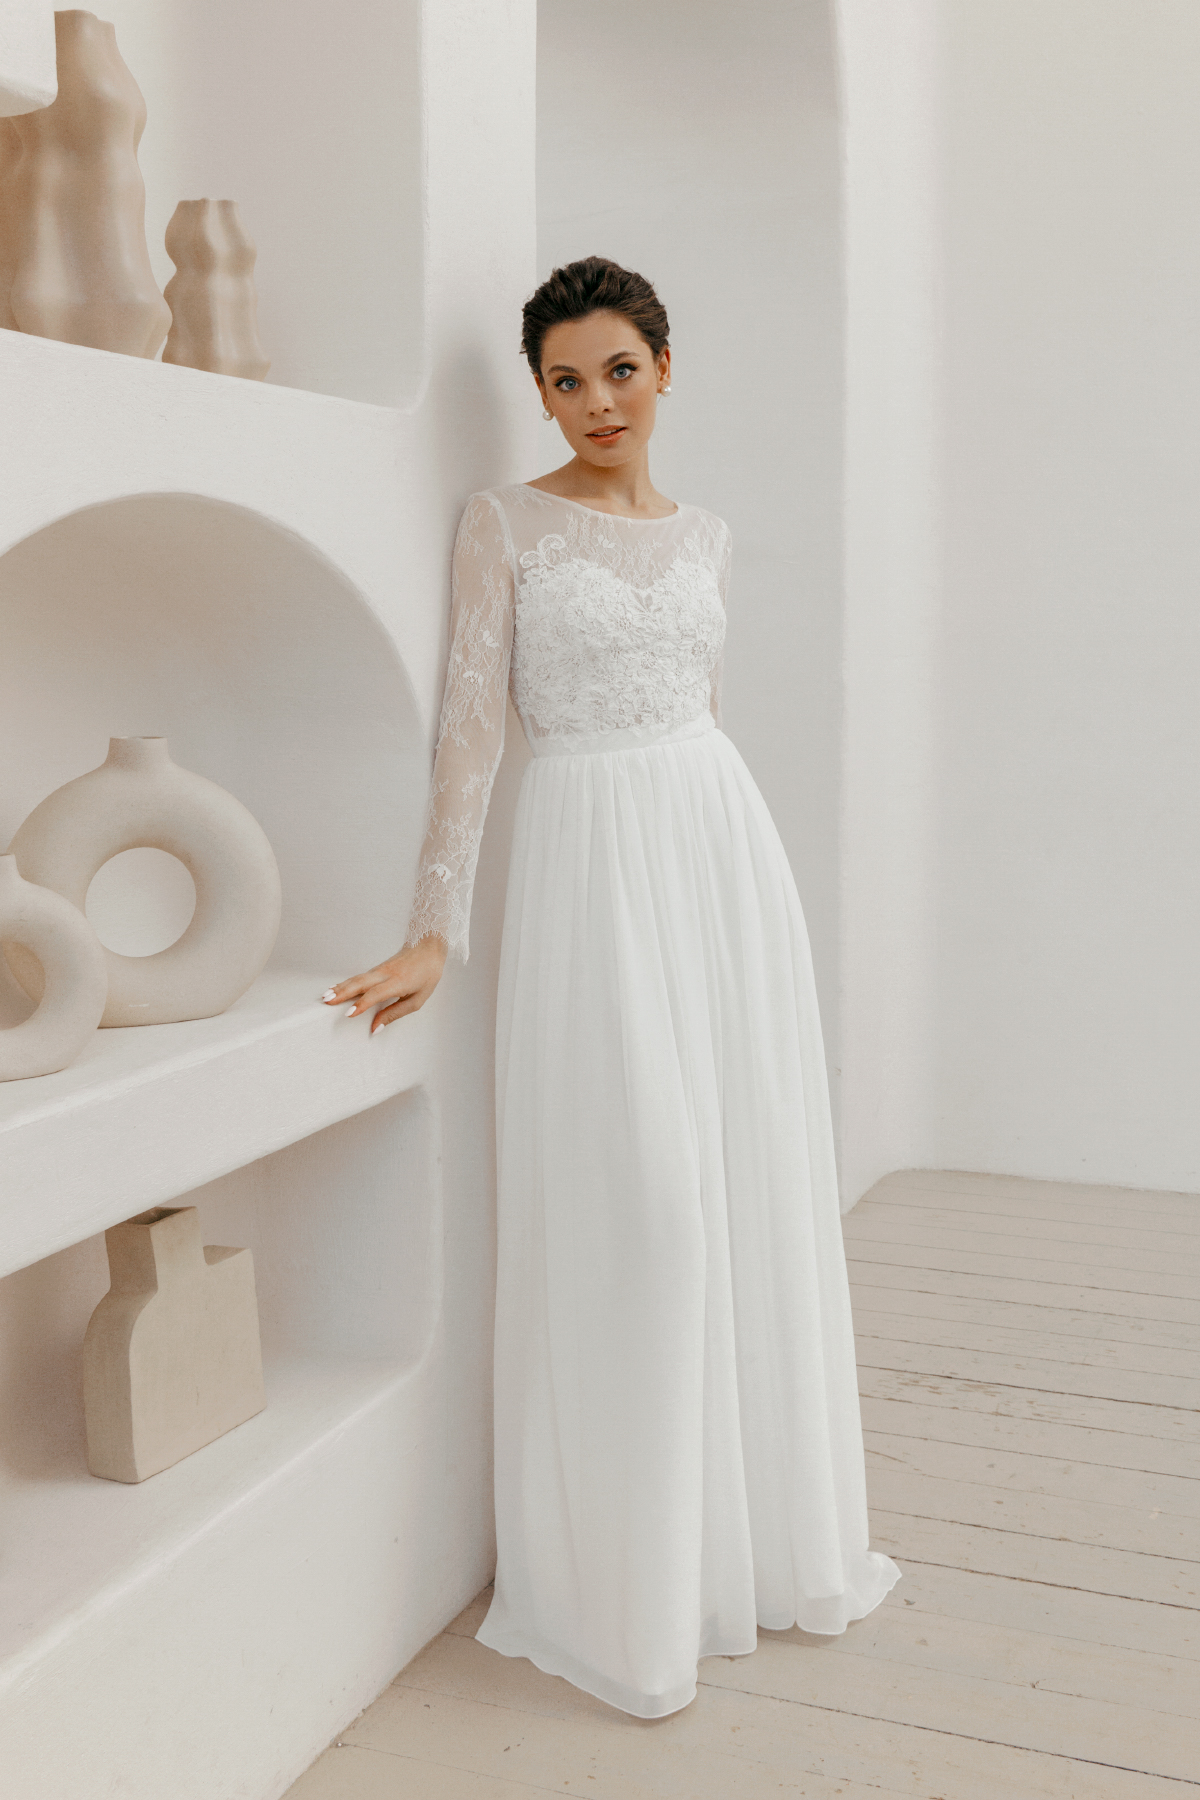 Lace and chiffon simple wedding dress in rustic style.